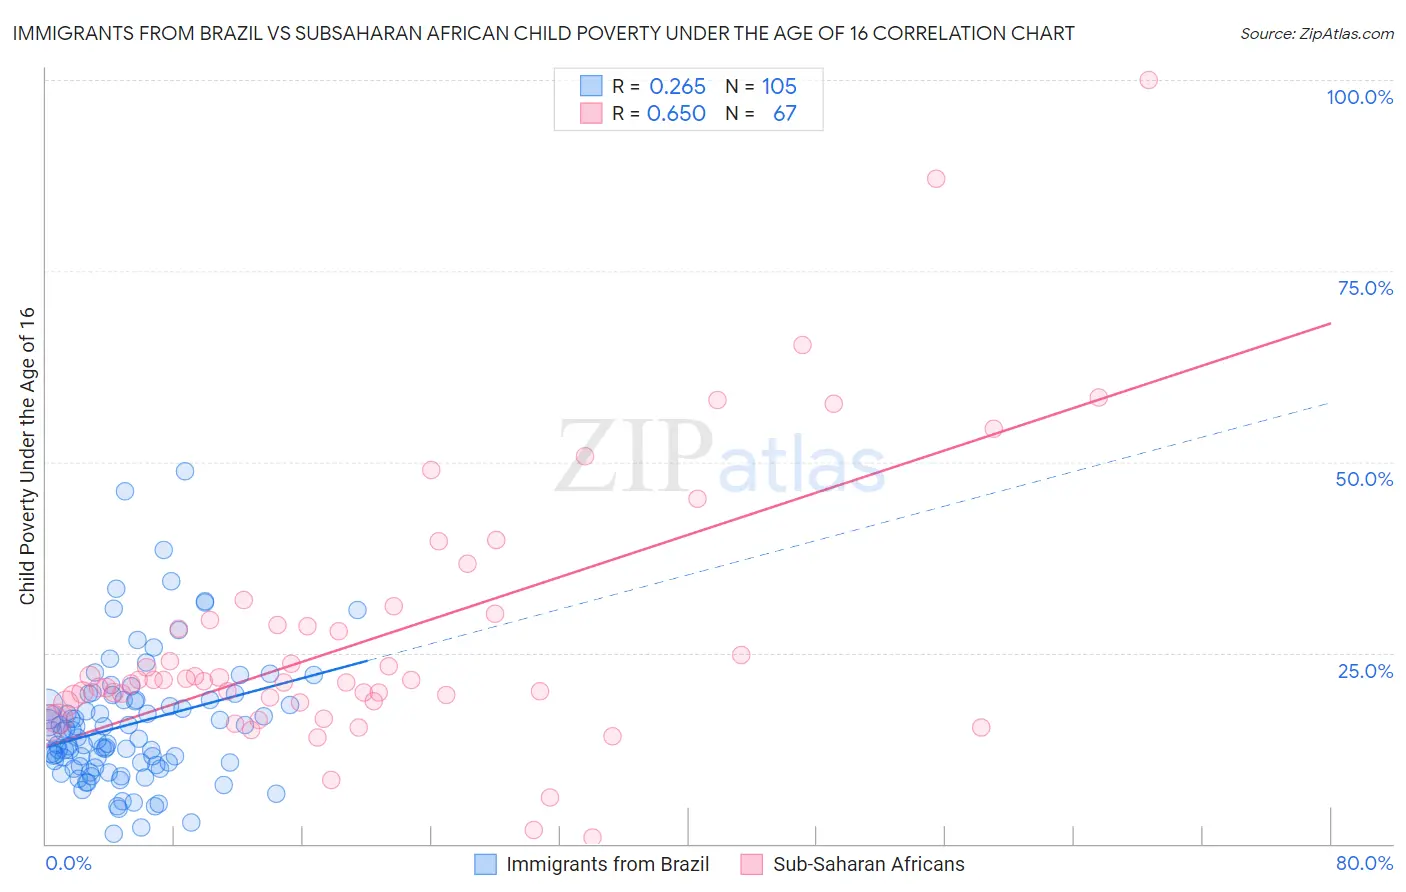 Immigrants from Brazil vs Subsaharan African Child Poverty Under the Age of 16